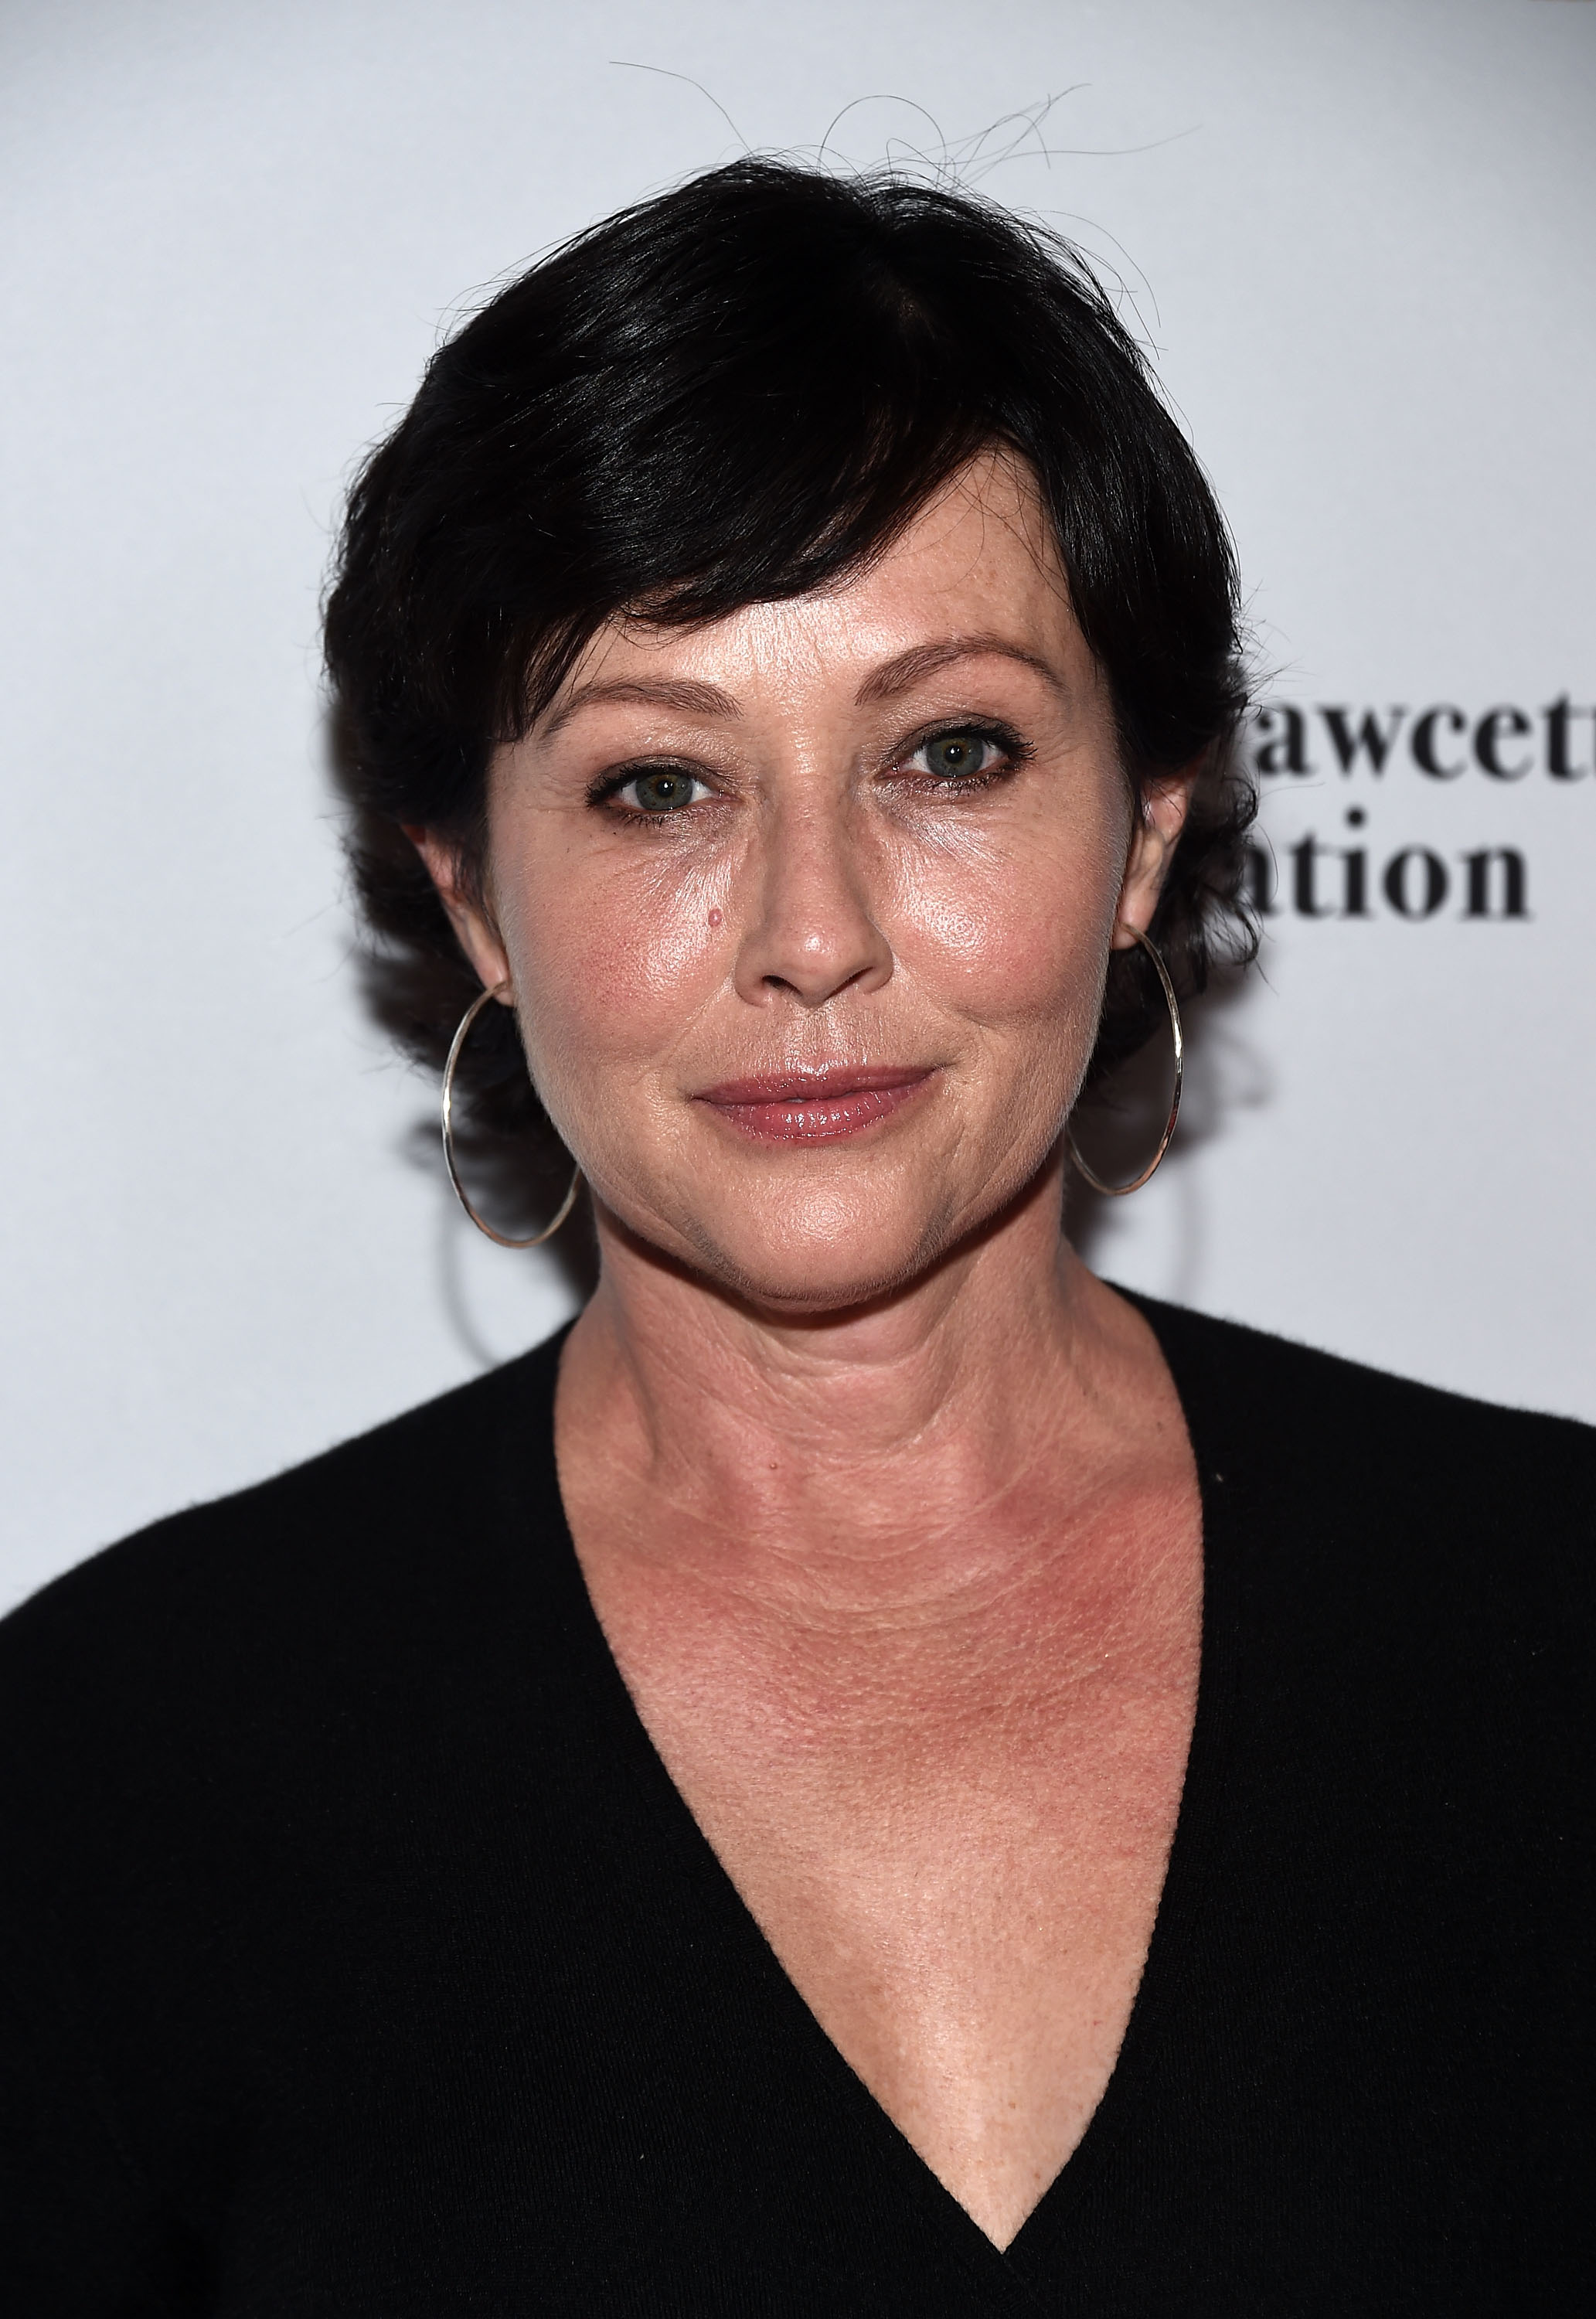 Shannen Doherty arrives at the Farrah Fawcett Foundation's "Tex-Mex Fiesta" event the Wallis Annenberg Center for the Performing Arts on September 9, 2017 in Beverly Hills, California | Source: Getty Images